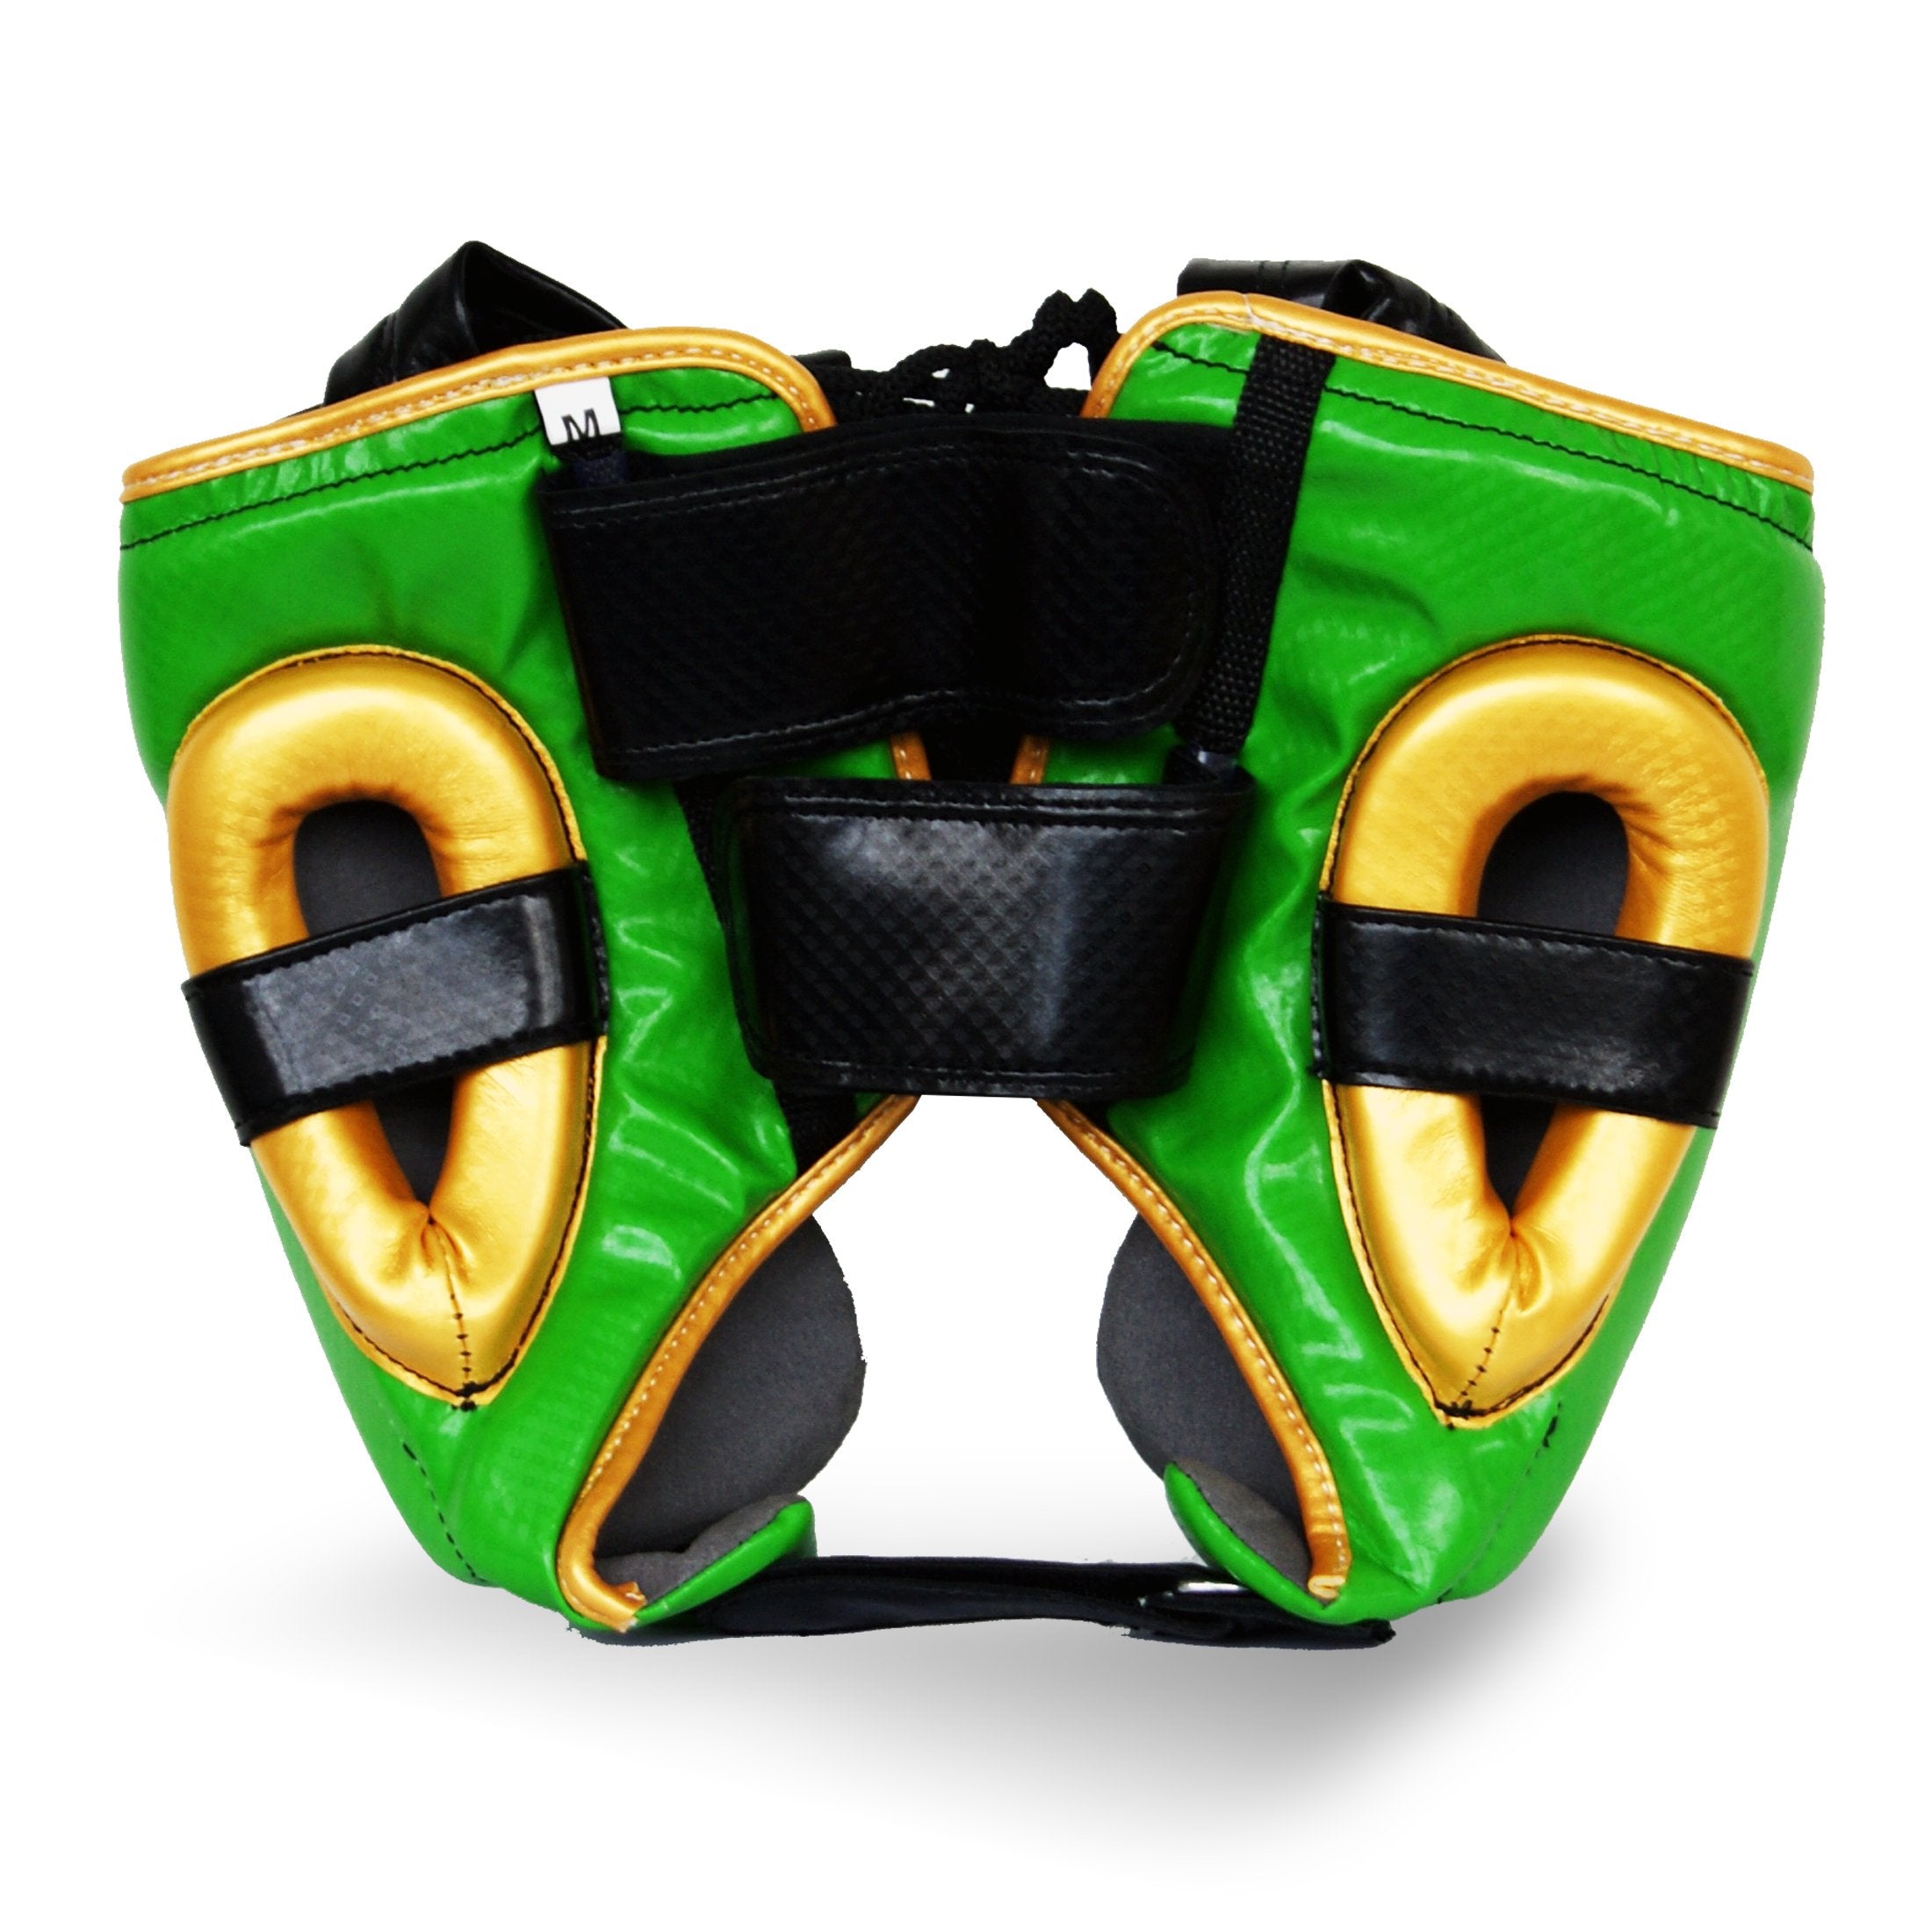 Pro Fitness Head Guard Synthetic Leather Metallic Green / Black / Gold